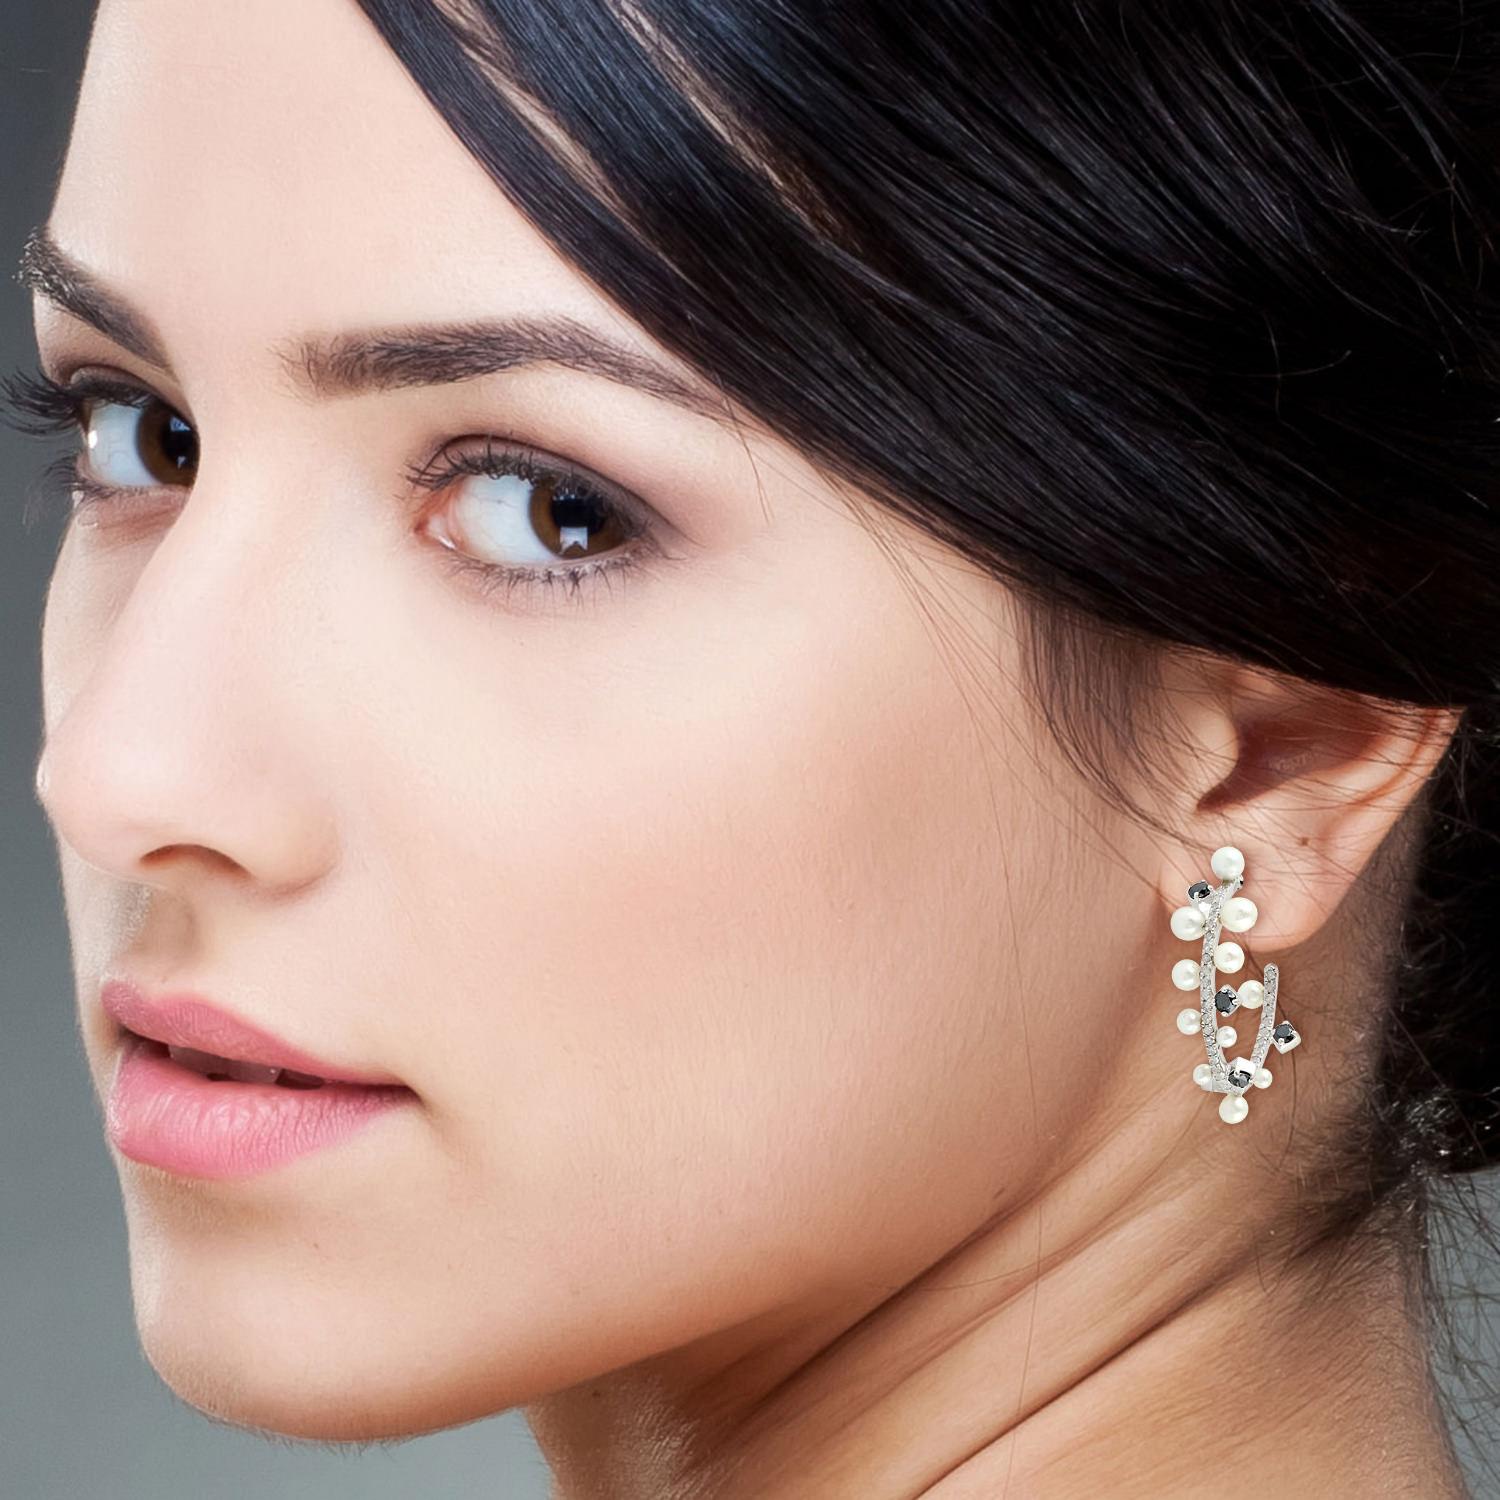 Handcrafted from sterling silver, these beautiful hoop earrings are set with 5.52 carats pearl and 1.54 carats diamonds.

FOLLOW  MEGHNA JEWELS storefront to view the latest collection & exclusive pieces.  Meghna Jewels is proudly rated as a Top